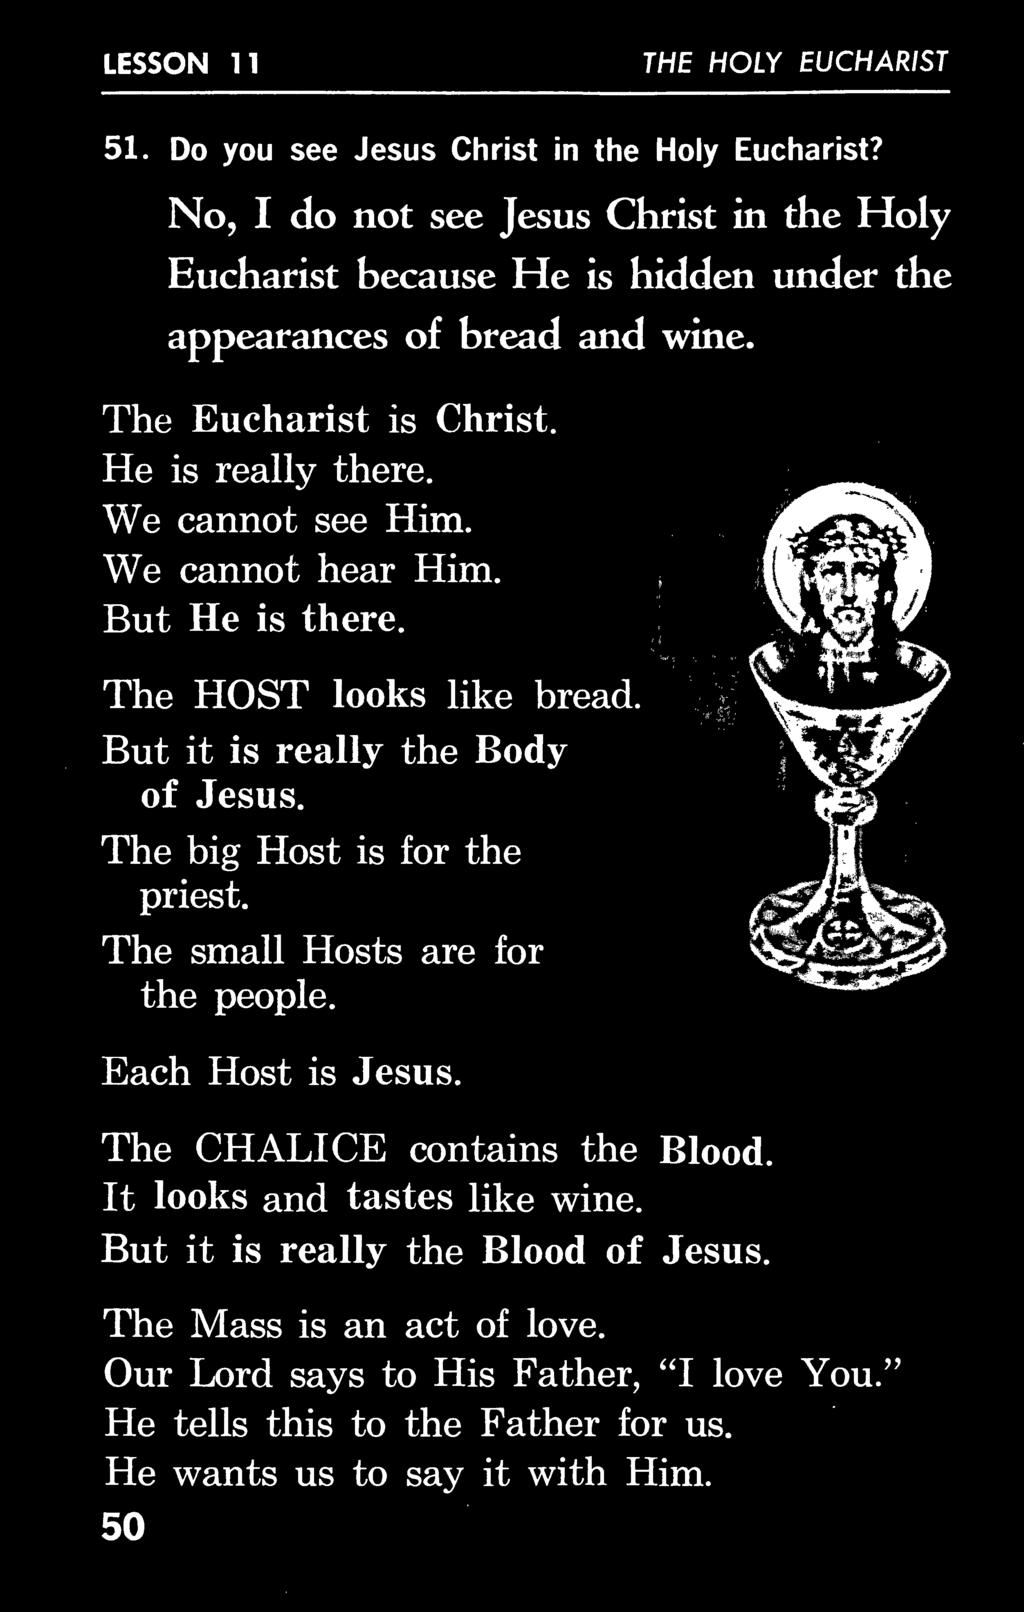 The Eucharist is He is The HOST looks like But it is really the Body of Jesus. The big Host is for the Each Host is Jesus. The CHALICE contains the Blood.